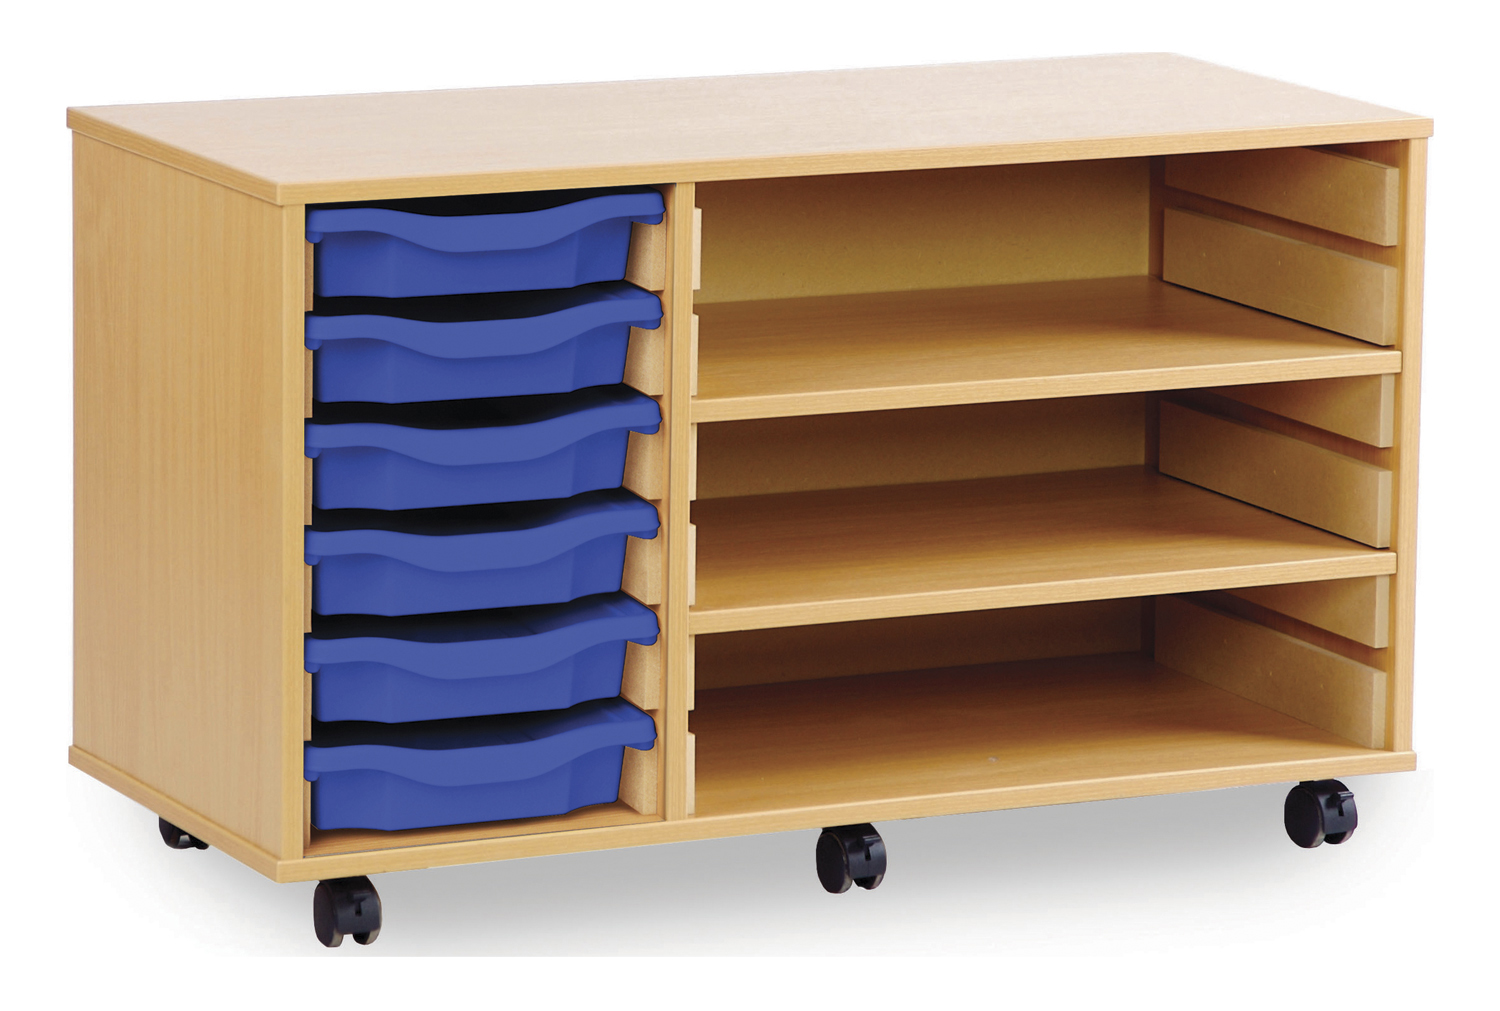 Combination Tray Storage Classroom Bookcase, 6 Tray/2 Shelf - 103wx46dx62h (cm), Red/Blue/Green/Yellow Trays